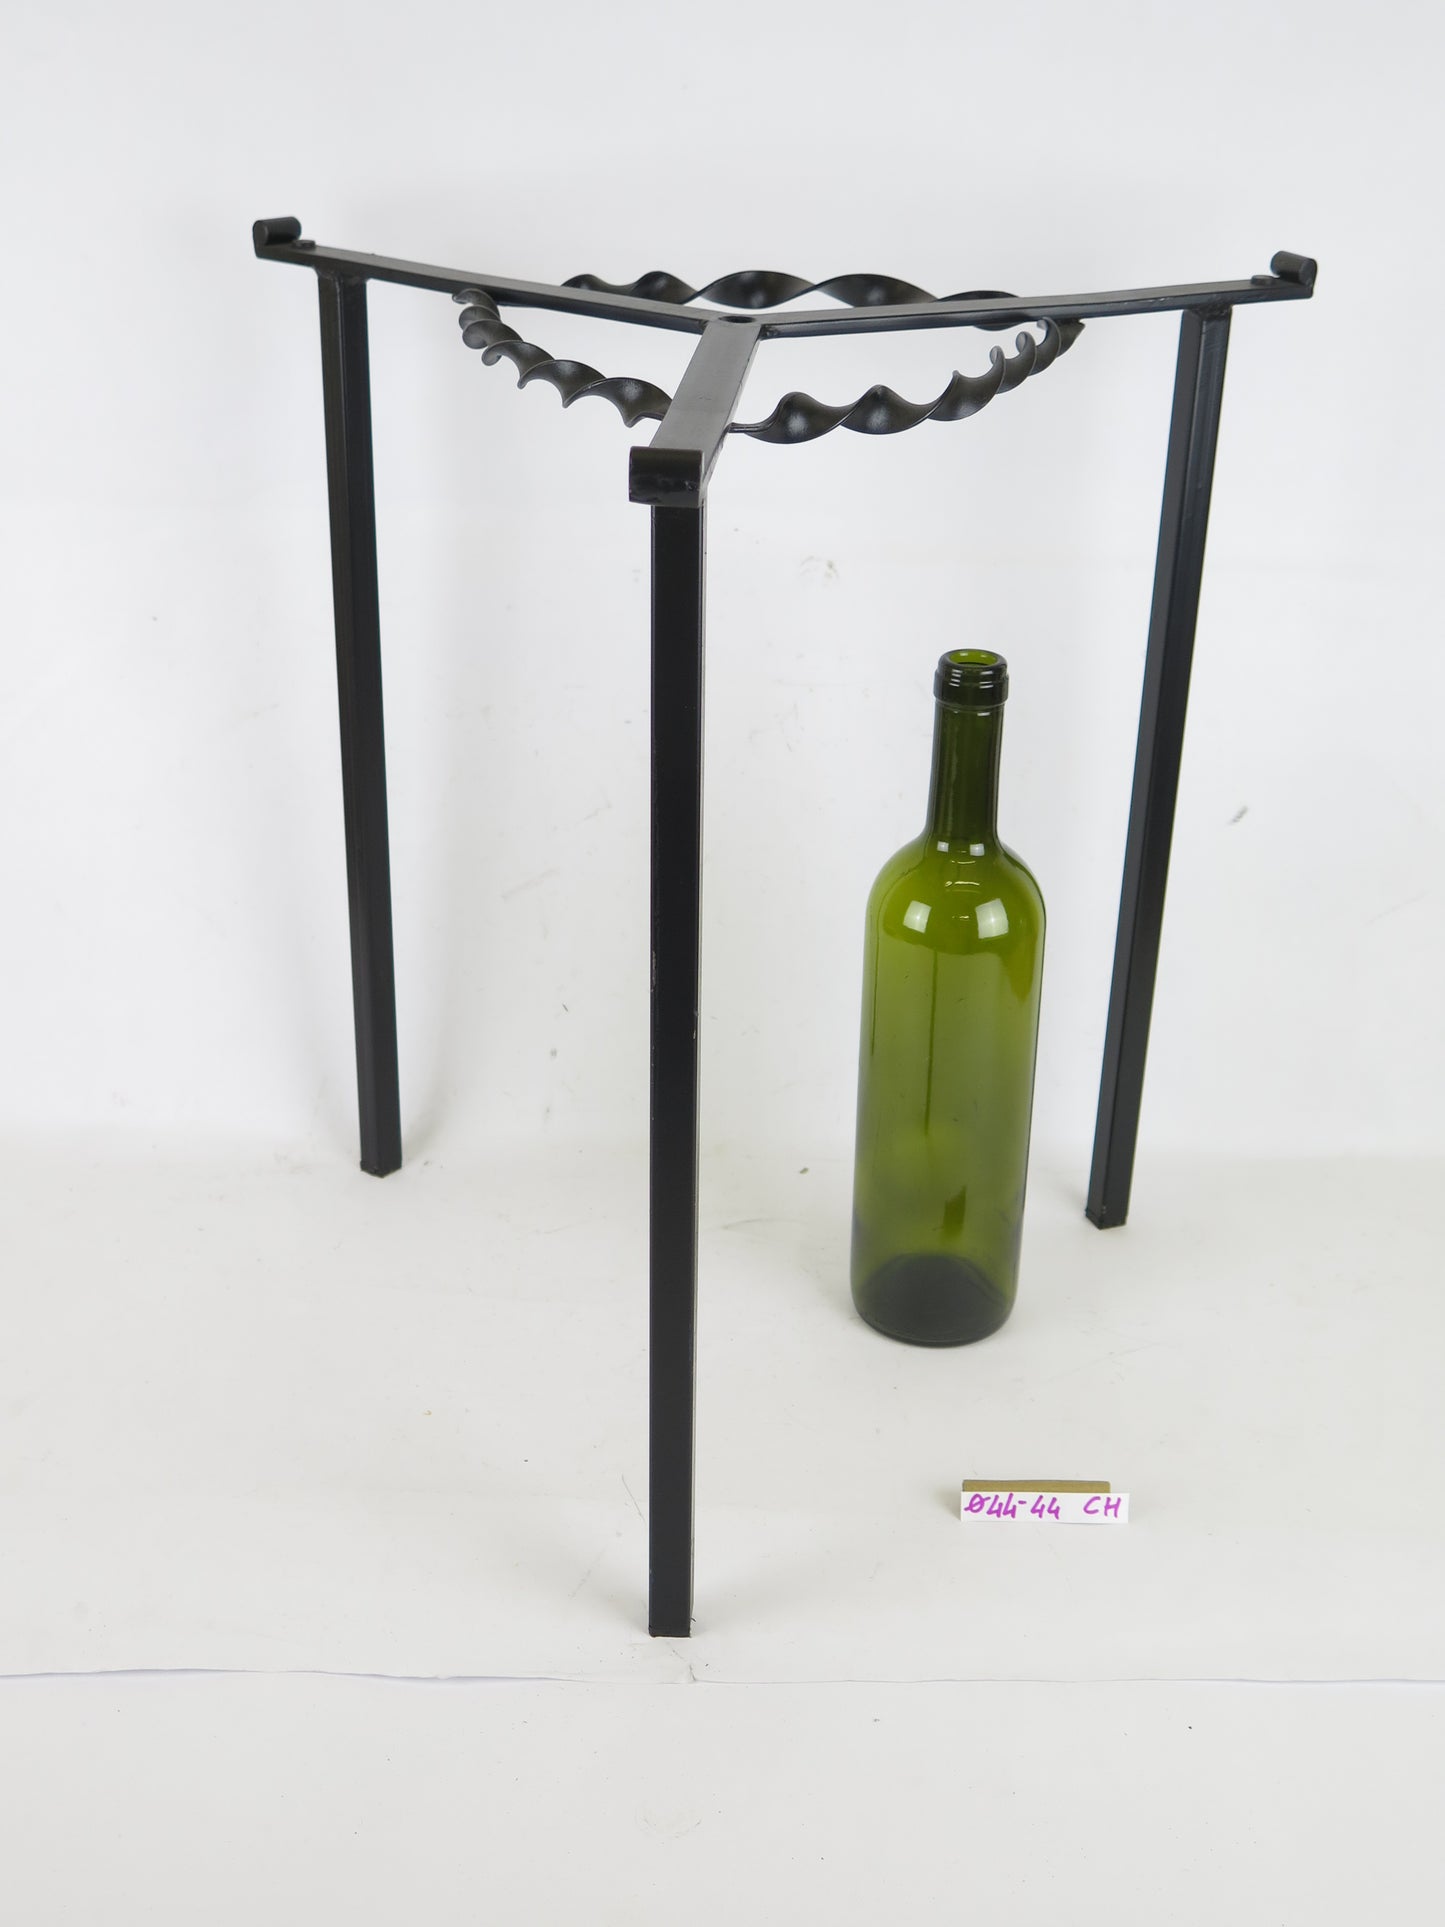 OLD HIGH QUALITY HAND FORGED WROUGHT IRON TABLE CH